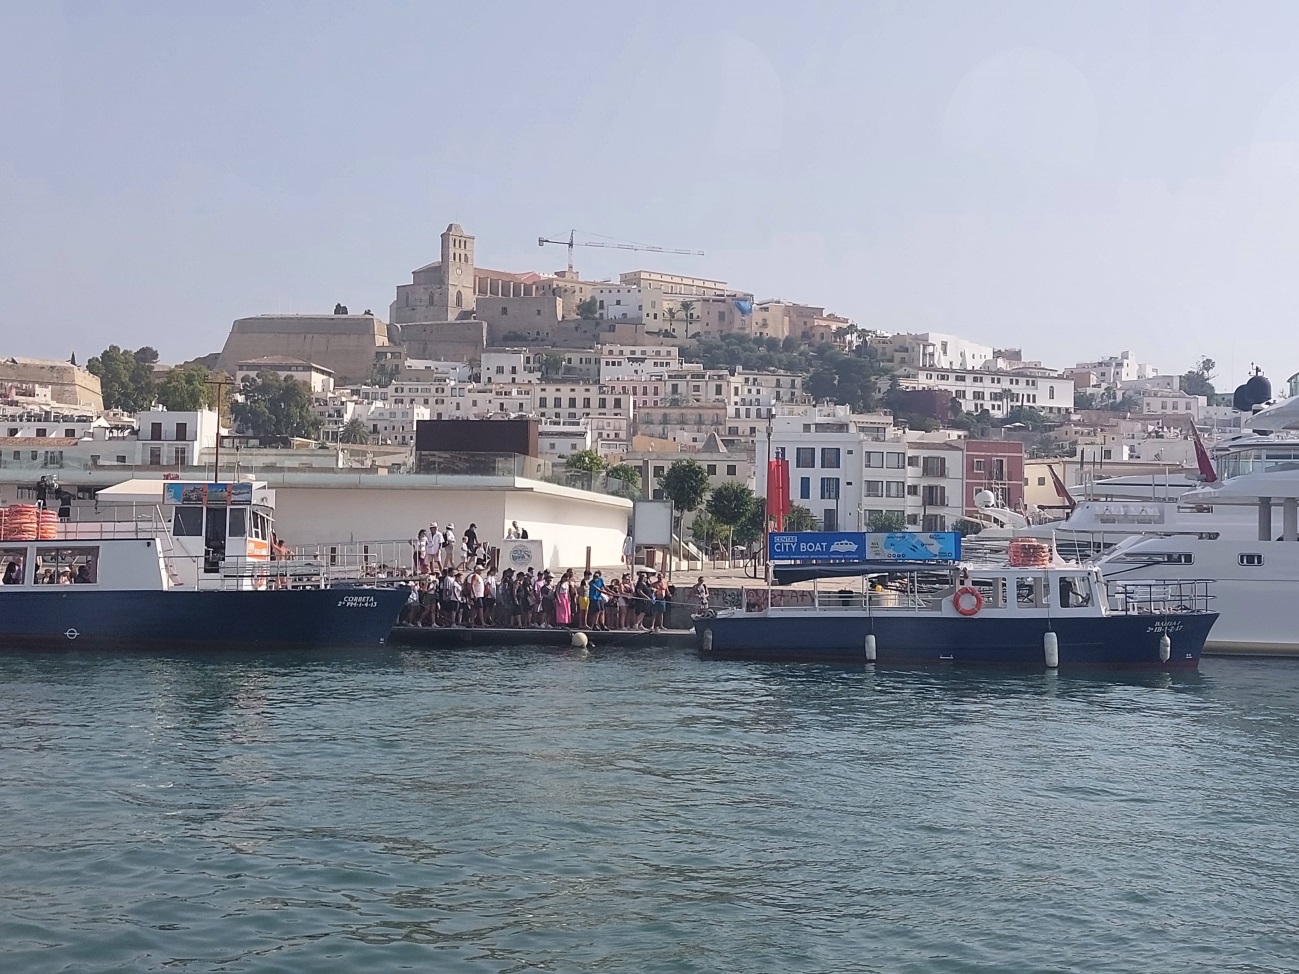 The APB is putting the nautical bus service in the port of Eivissa out to public tender